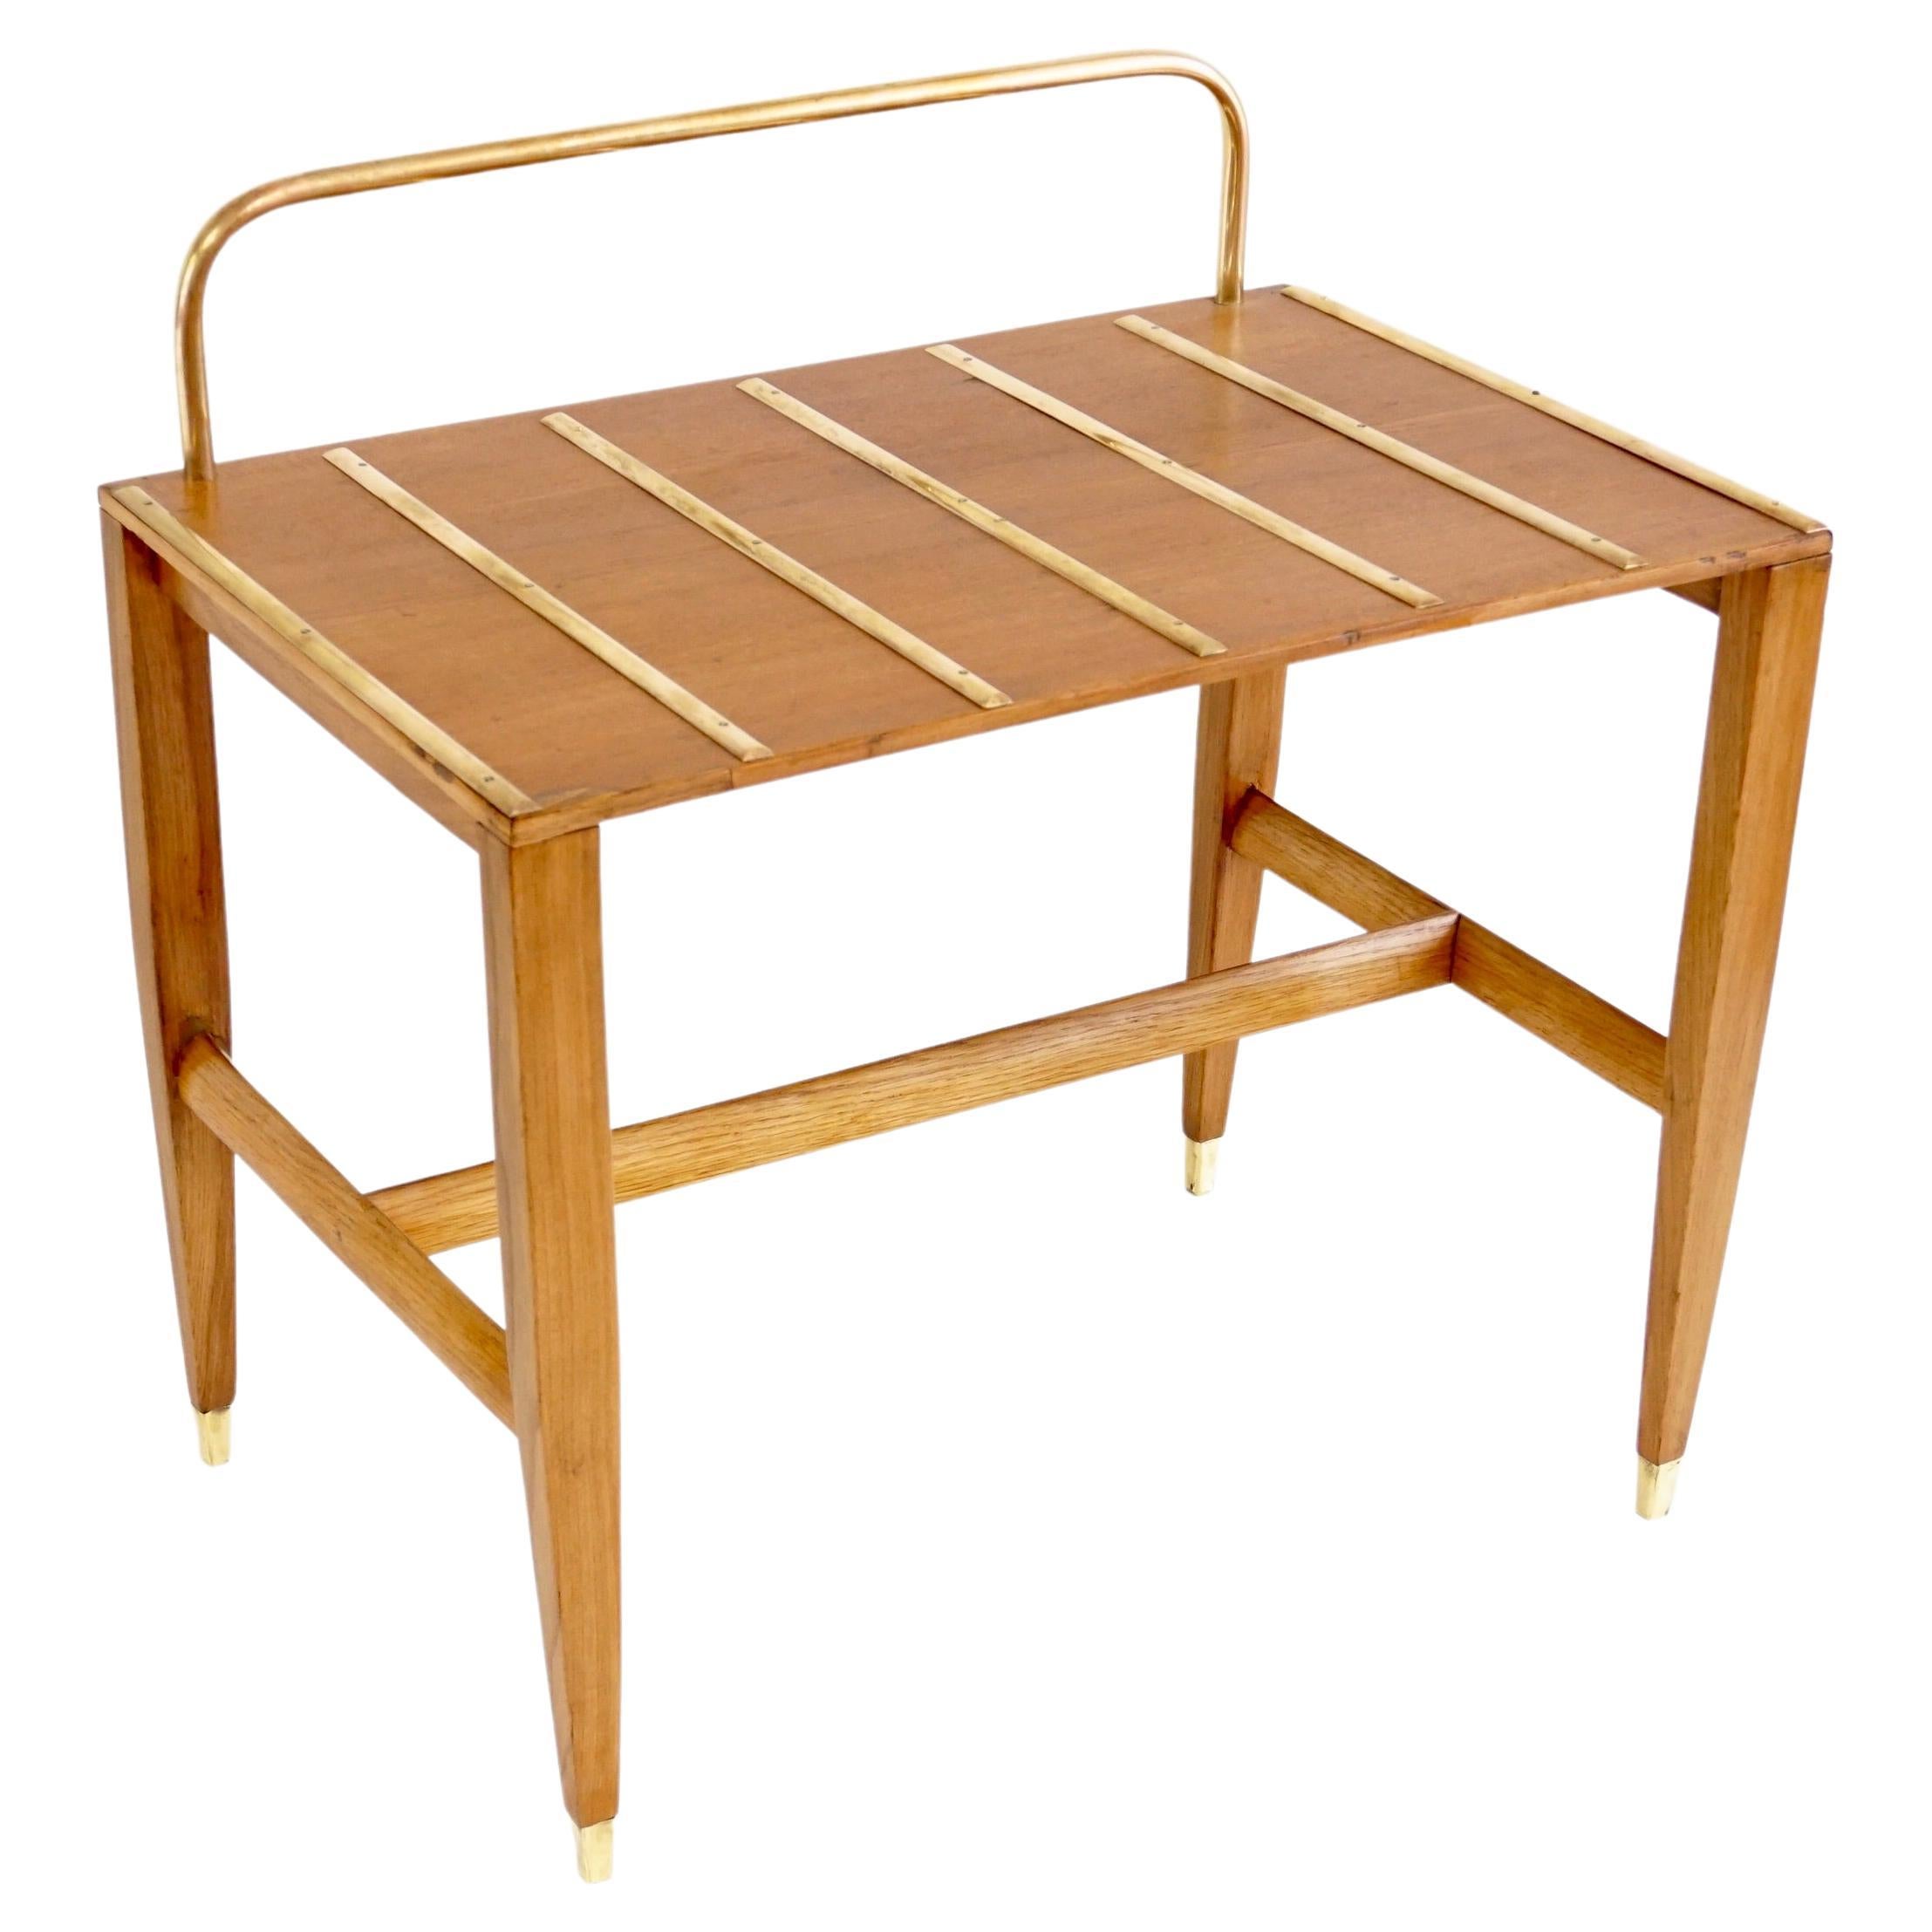 Gio Ponti Walnut Side Table, Luggage Rack for Hotel Royal Naples, 1955 For Sale